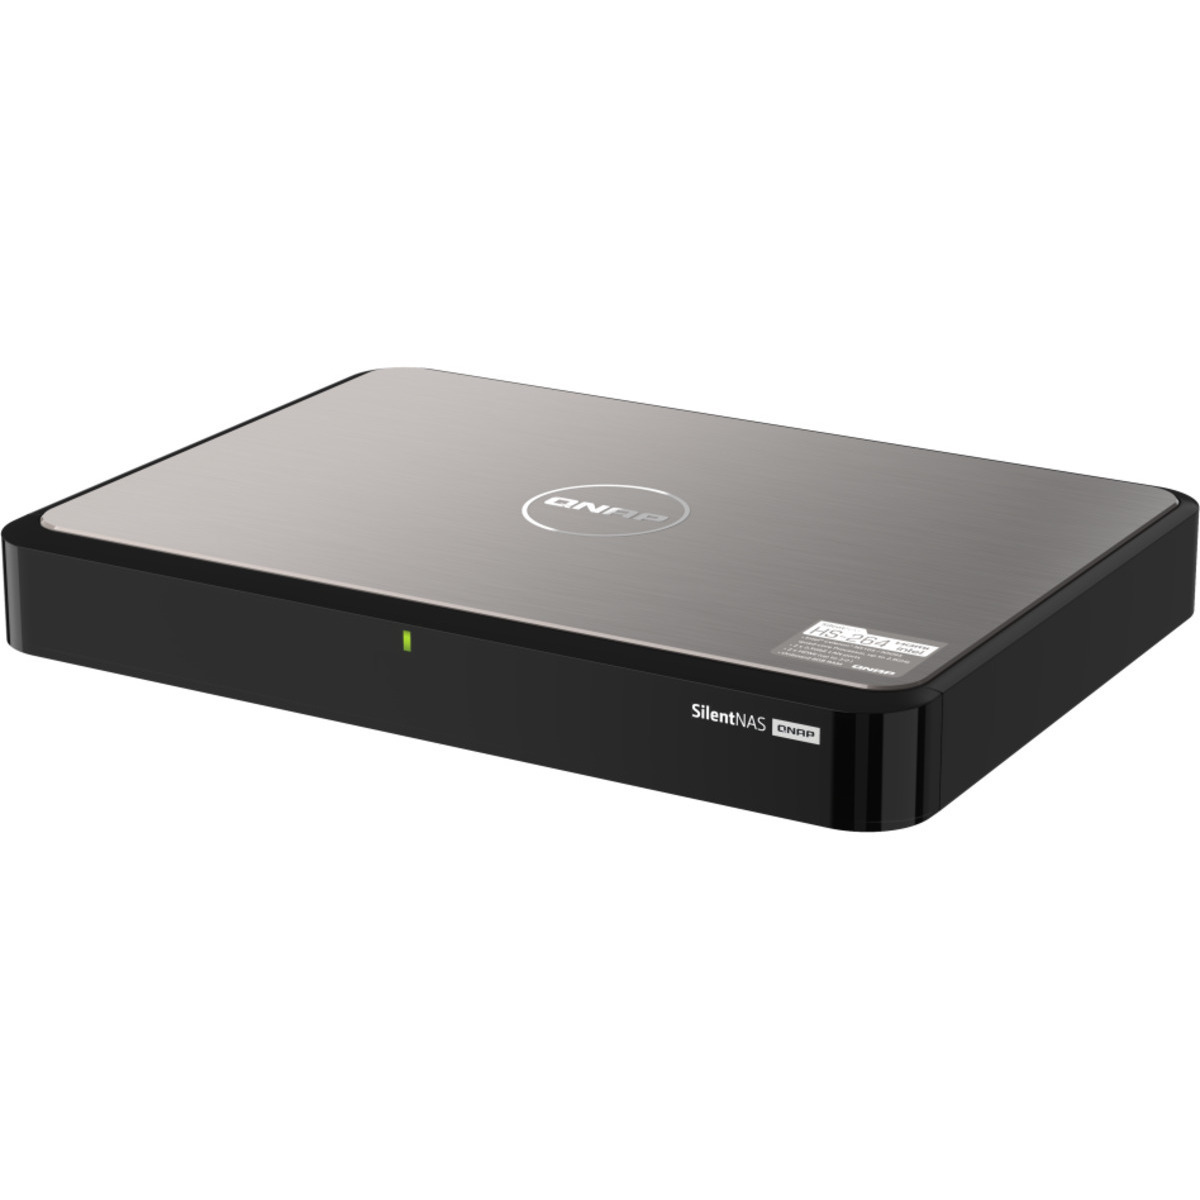 QNAP HS-264 16tb 2-Bay Desktop Multimedia / Power User / Business NAS - Network Attached Storage Device 2x8tb Samsung 870 QVO MZ-77Q8T0 2.5 560/530MB/s SATA 6Gb/s SSD CONSUMER Class Drives Installed - Burn-In Tested HS-264